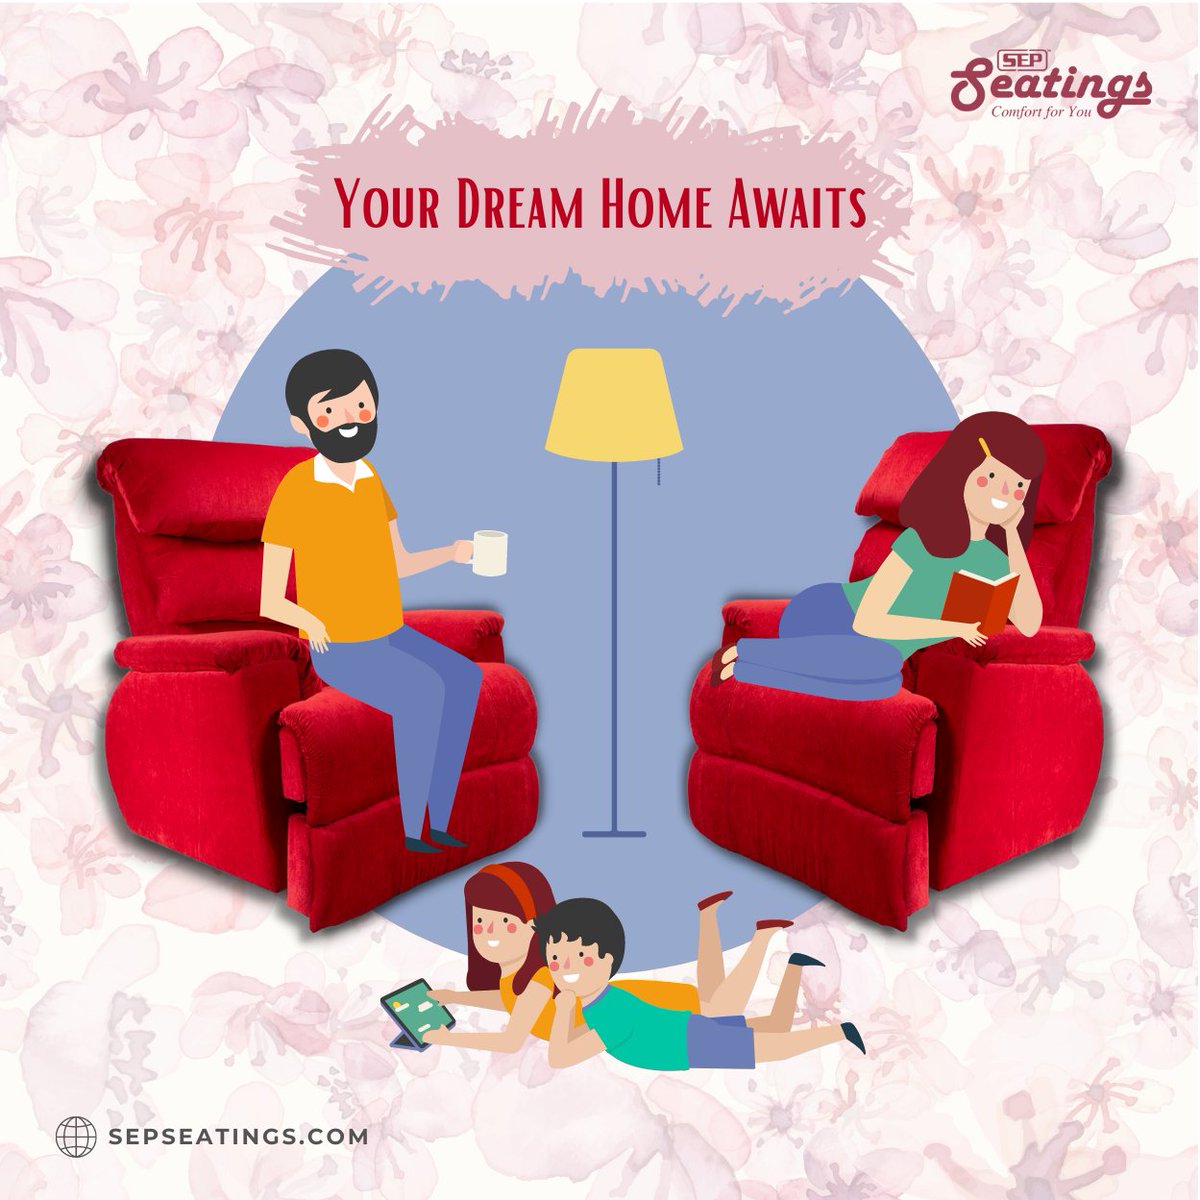 'Add a touch of luxury to your home with Sepseatings recliners - your key to happiness.'

#SepseatingsRecliners #RelaxAtHome #HappyHome #UltimateComfort #LuxuryLiving #HomeSanctuary #HappyAtHome #HomeComforts #SitBackAndRelax #HappyPlace #ReclinerLove #HomeHappiness